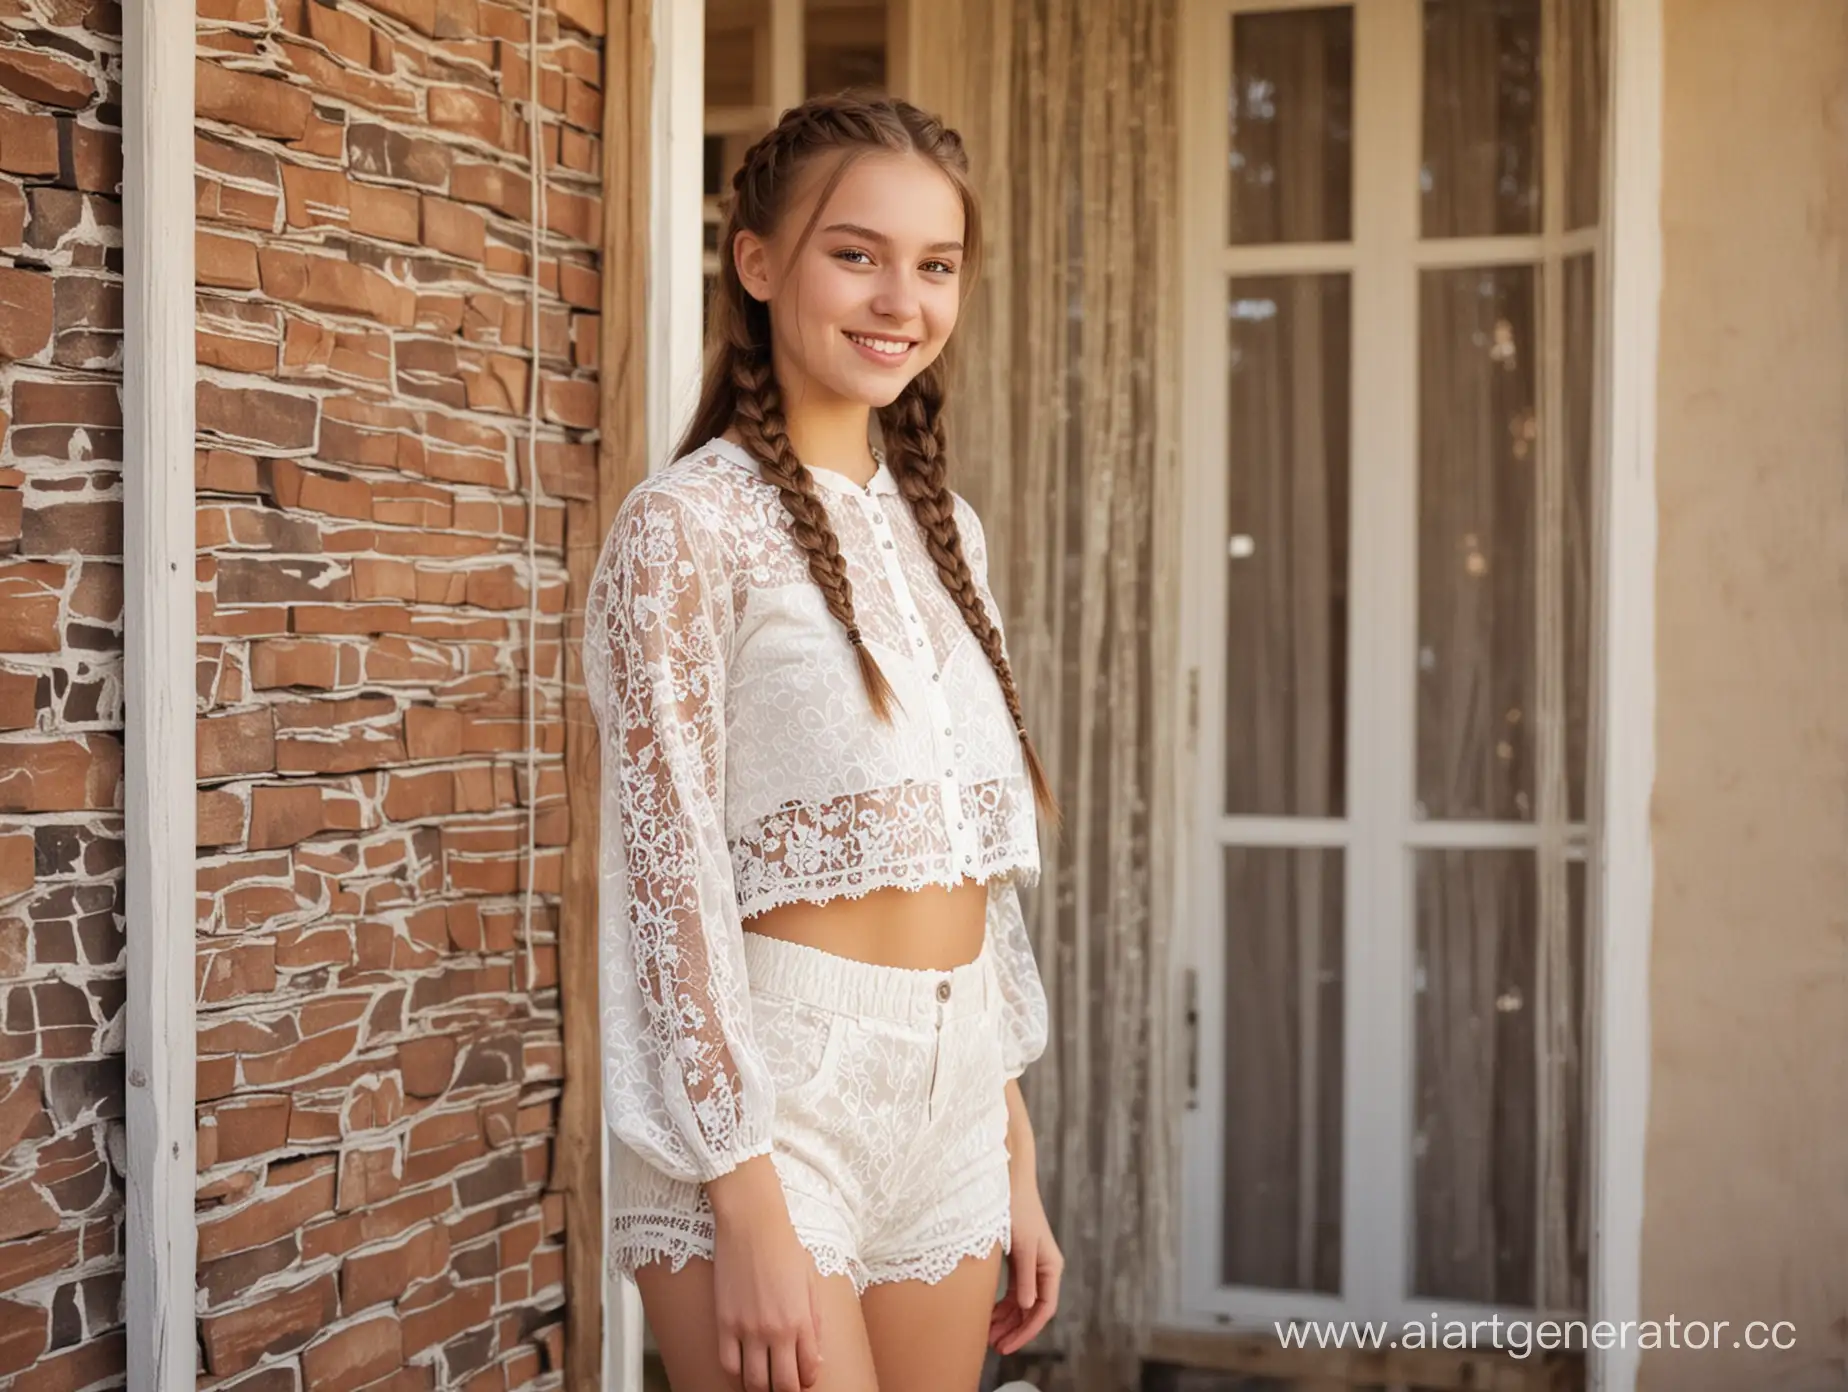 Smiling-Russian-Girl-in-Lace-Shorts-and-Braids-at-Country-House-Portrait